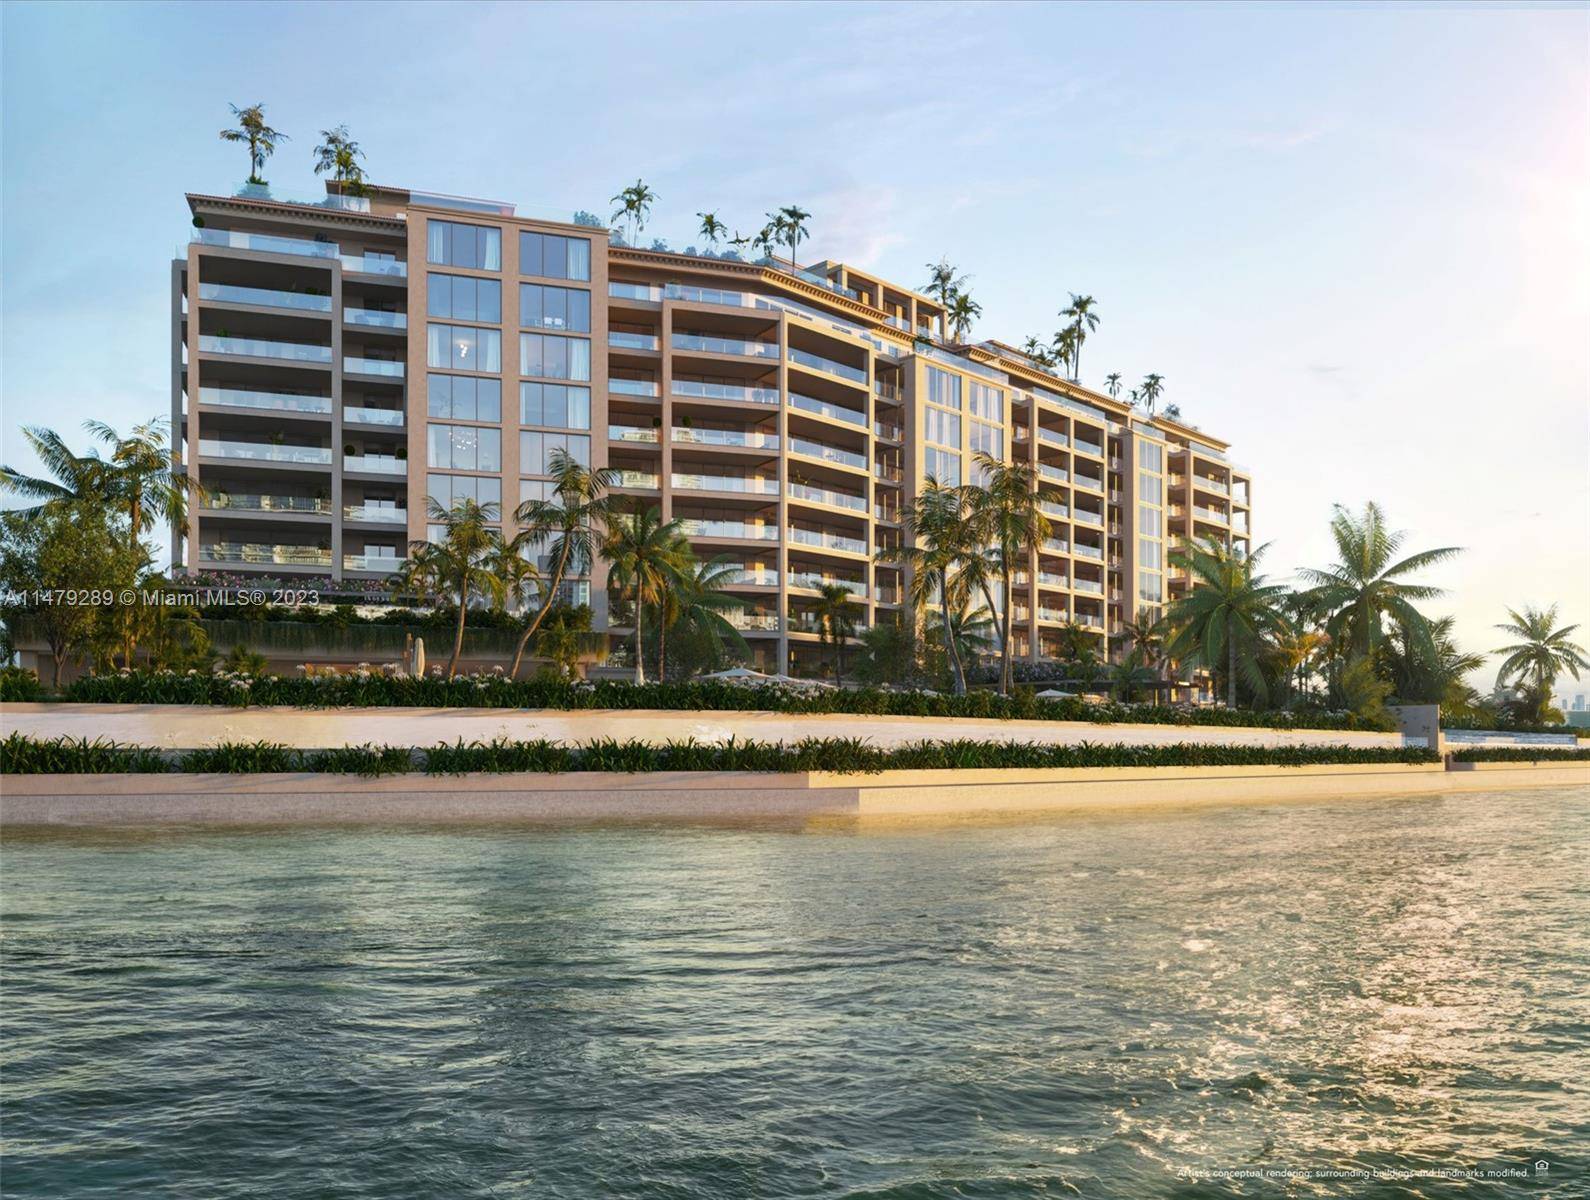 Fewer than 50 waterfront homes, The Residences at Six Fisher Island will be the last new construction project built on the ultra private island.